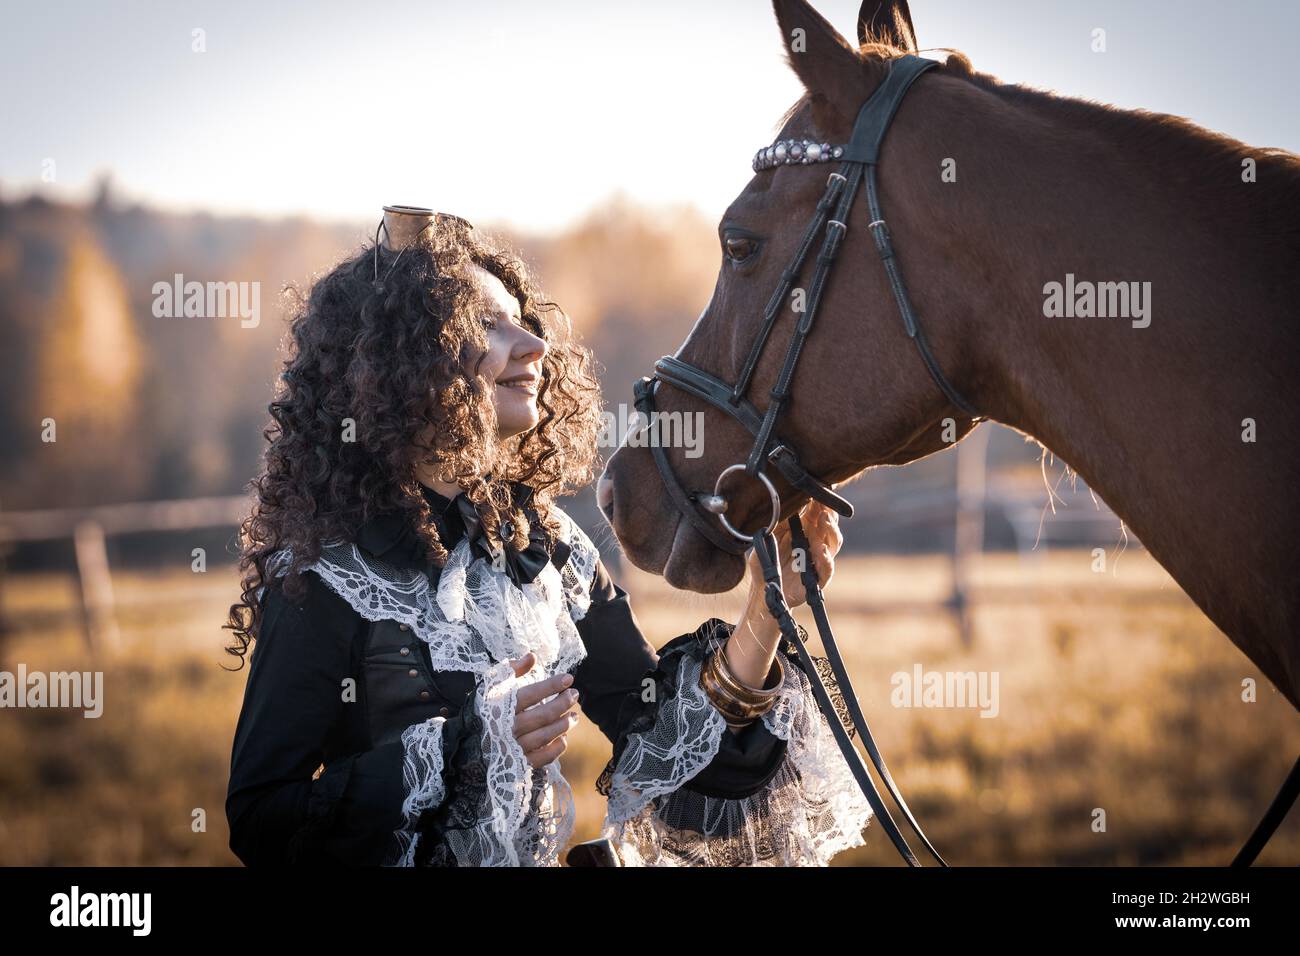 Portrait of a mature woman in a steampunk costume posing with a horse against the backdrop of an autumn landscape. Stock Photo